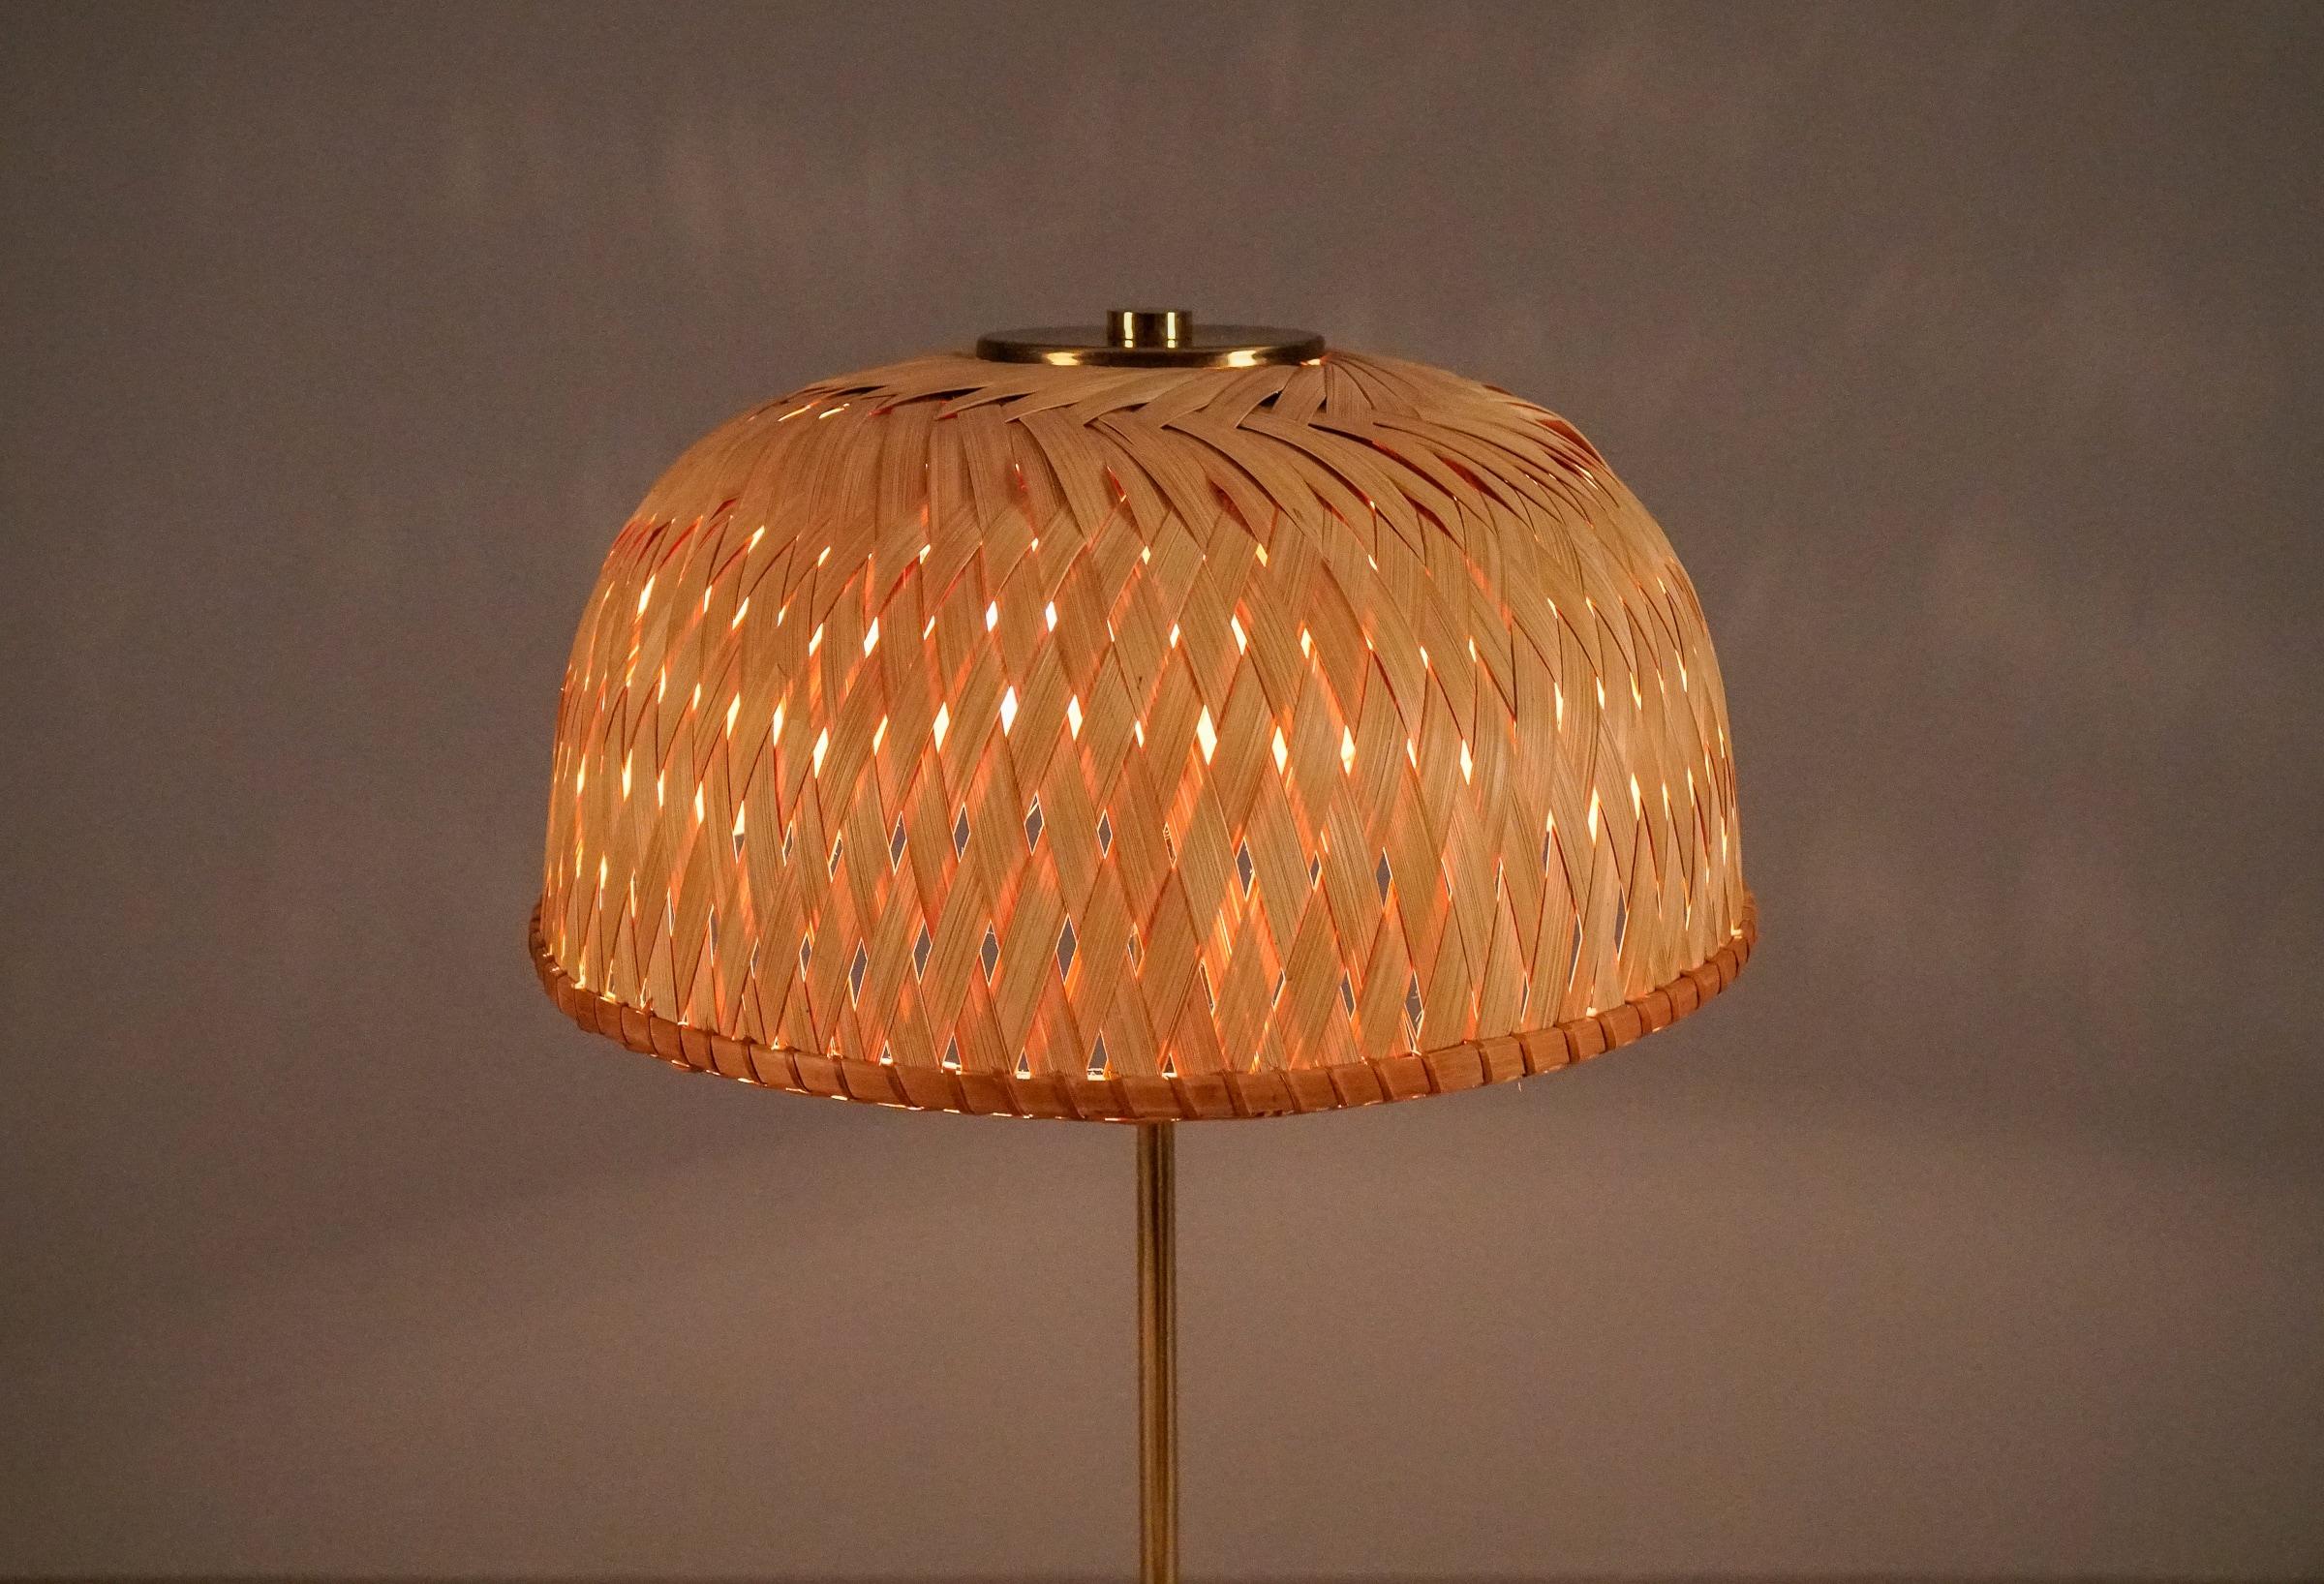 Tripod Floor Lamp in Brass and Wicker Shade, 1950s Italy For Sale 4